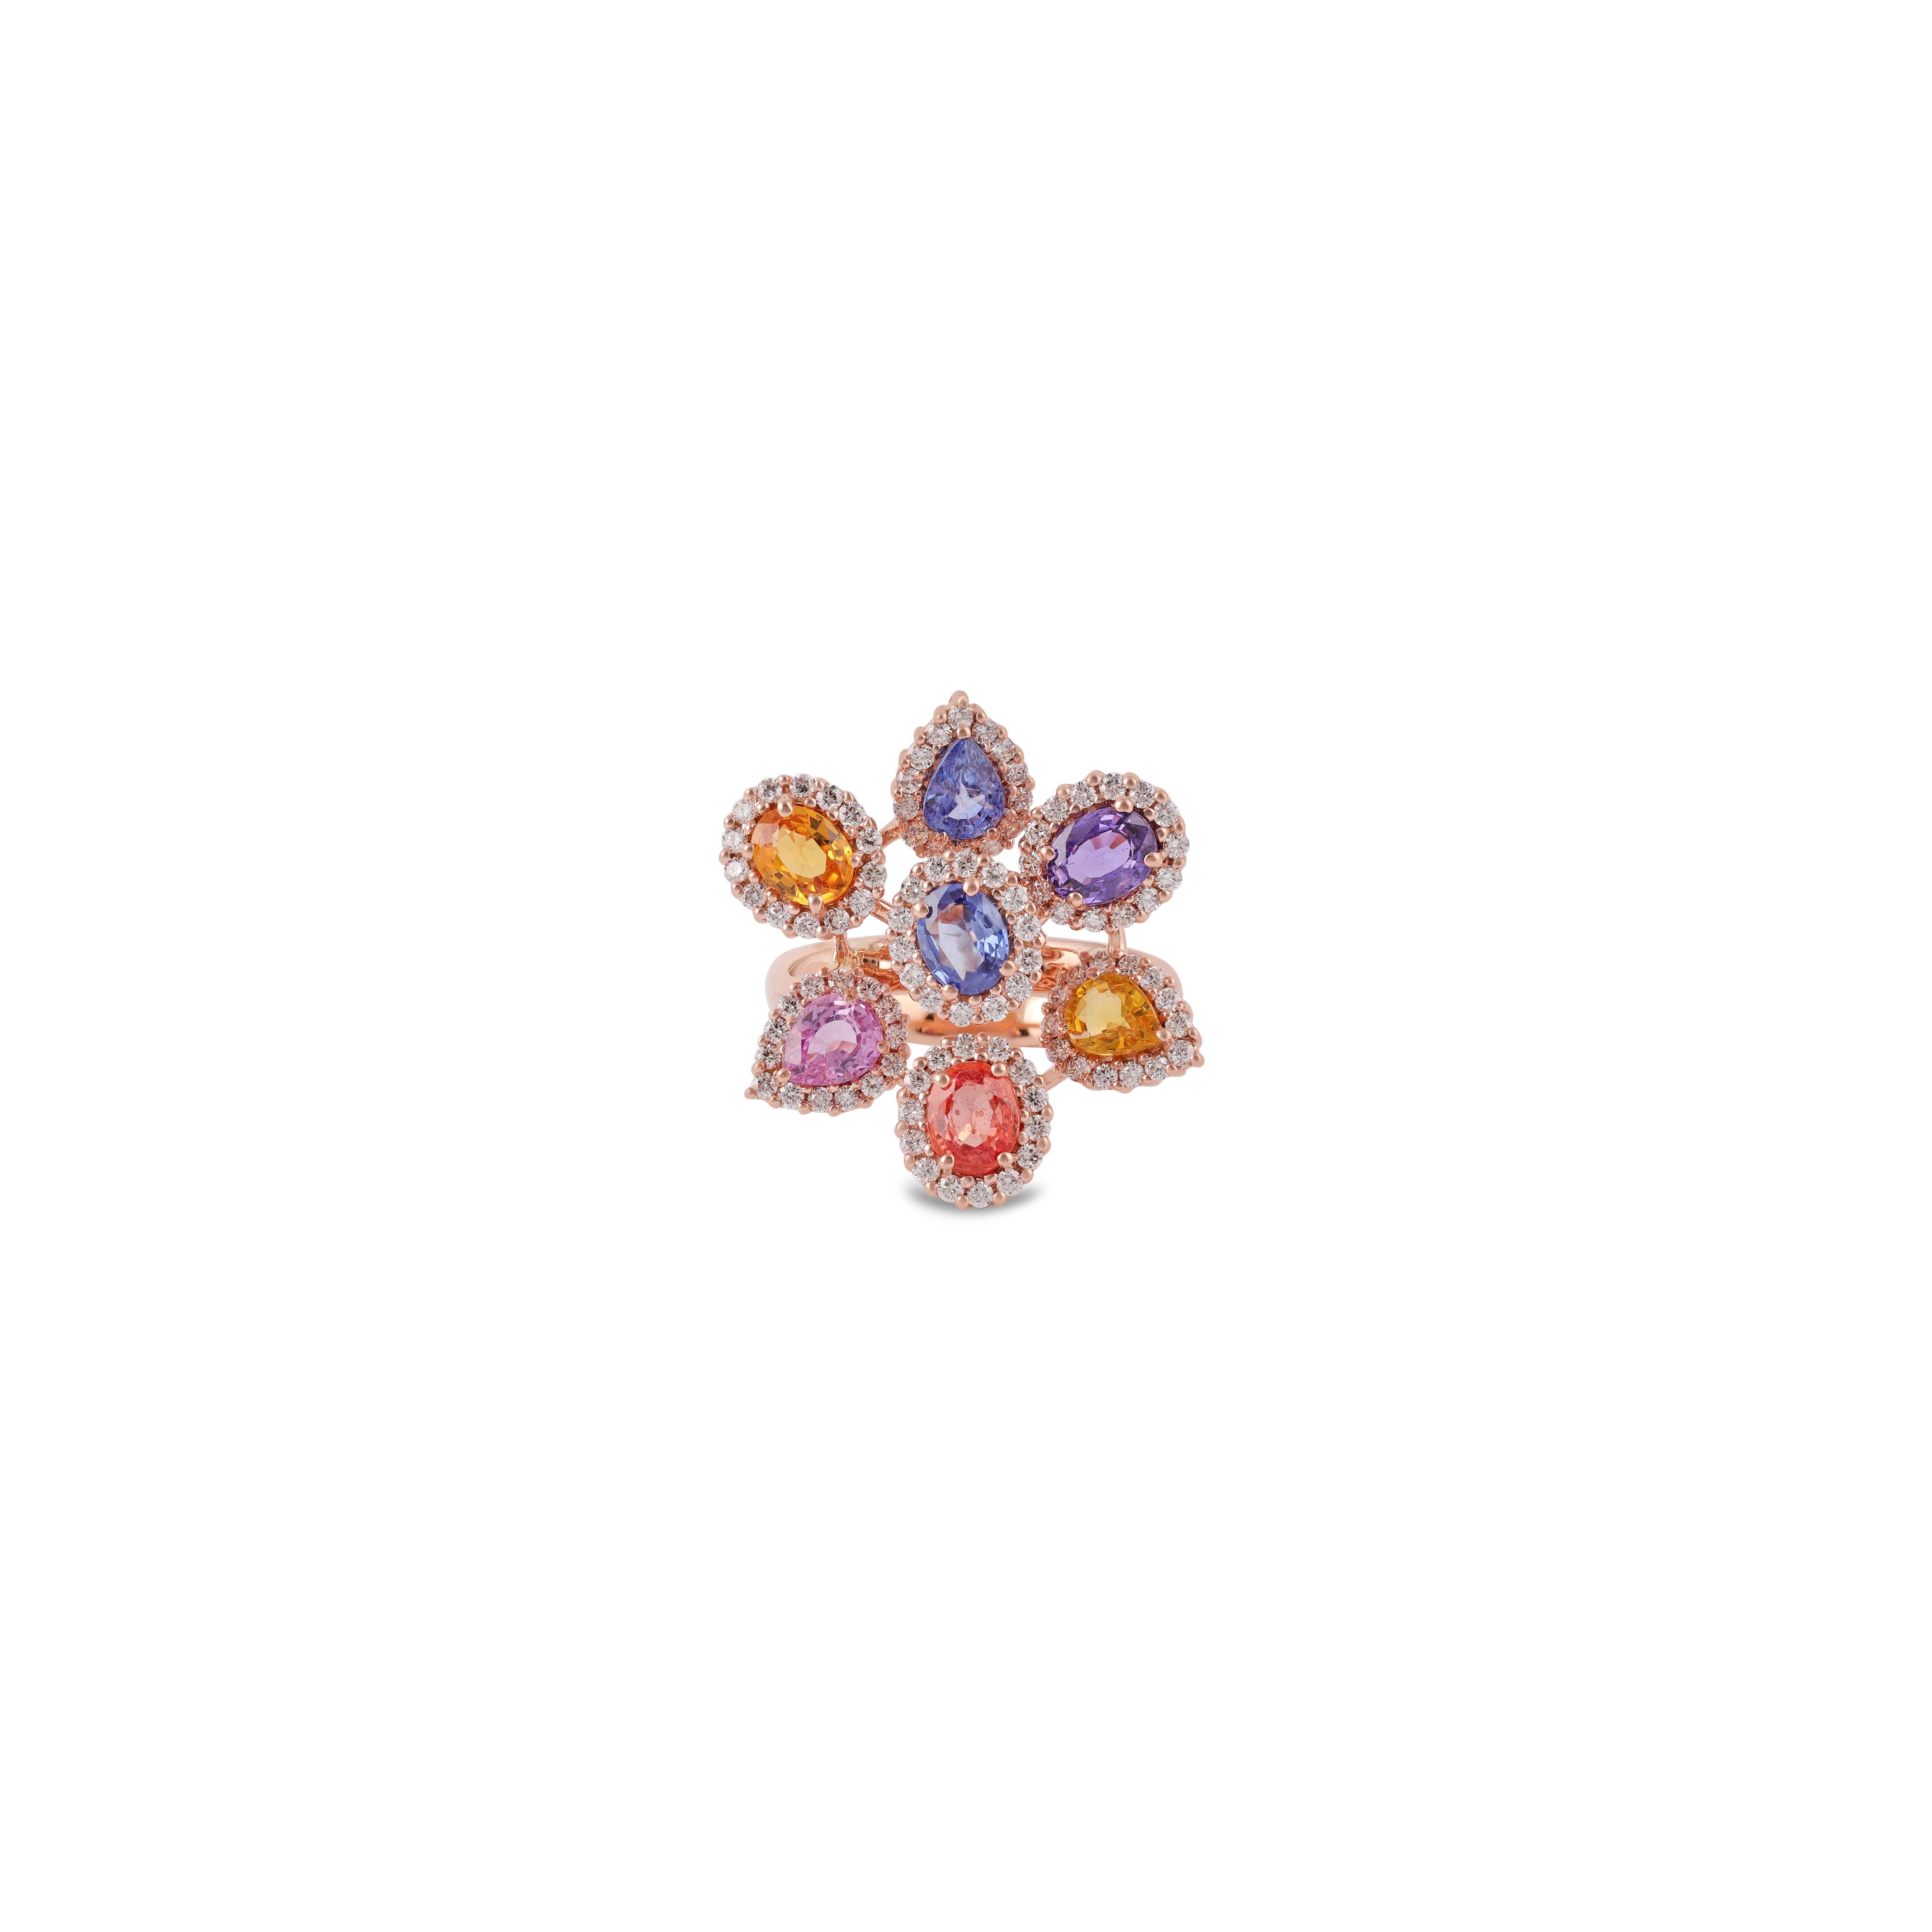 This is a designer floral pattern ring studded in 18k rose gold with 7 pieces of Multi Sapphire weight 2.91 carat with round shaped diamond weight 0.70 carat, this entire ring is studded in 18k rose gold weight 6.36 grams, in this ring size can be